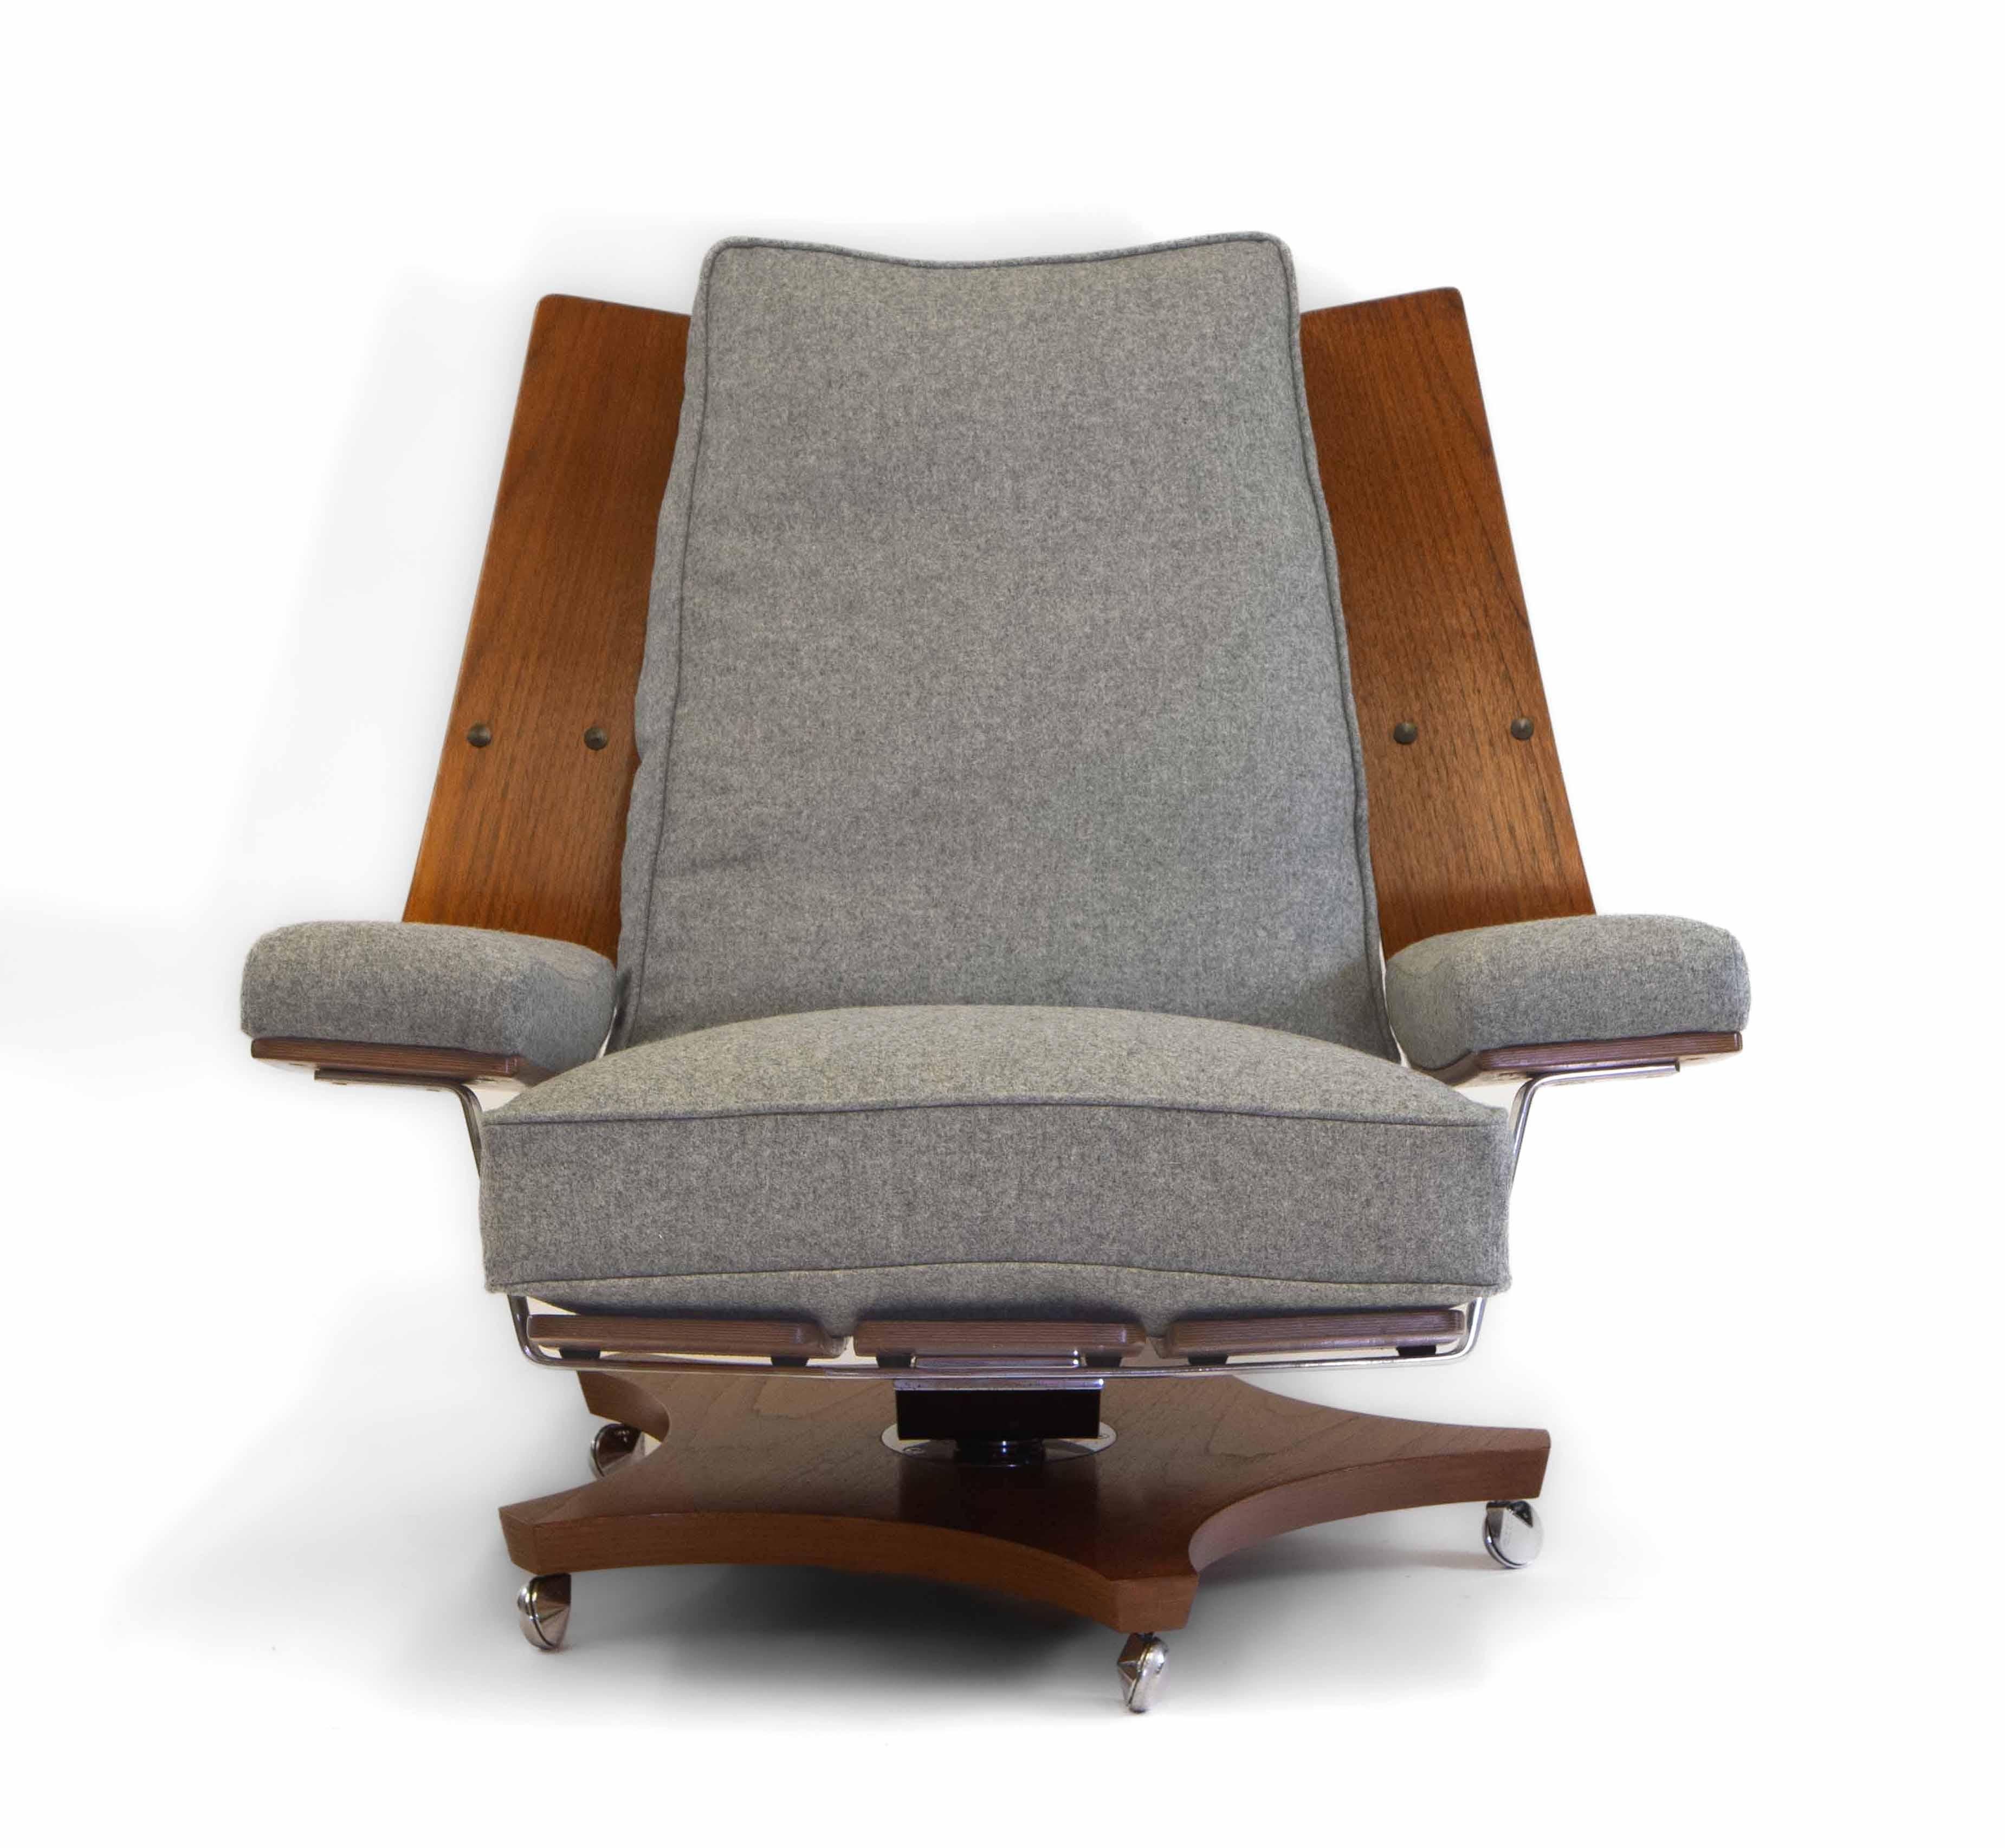 A superb iconic British statement chair - G-Plan “Housemaster” lounger armchair. circa 1970.

One of two available. 

Teak bent-ply design with oversized chrome plated brass T-back. The lounger's mechanism has light rocking motion and swivel